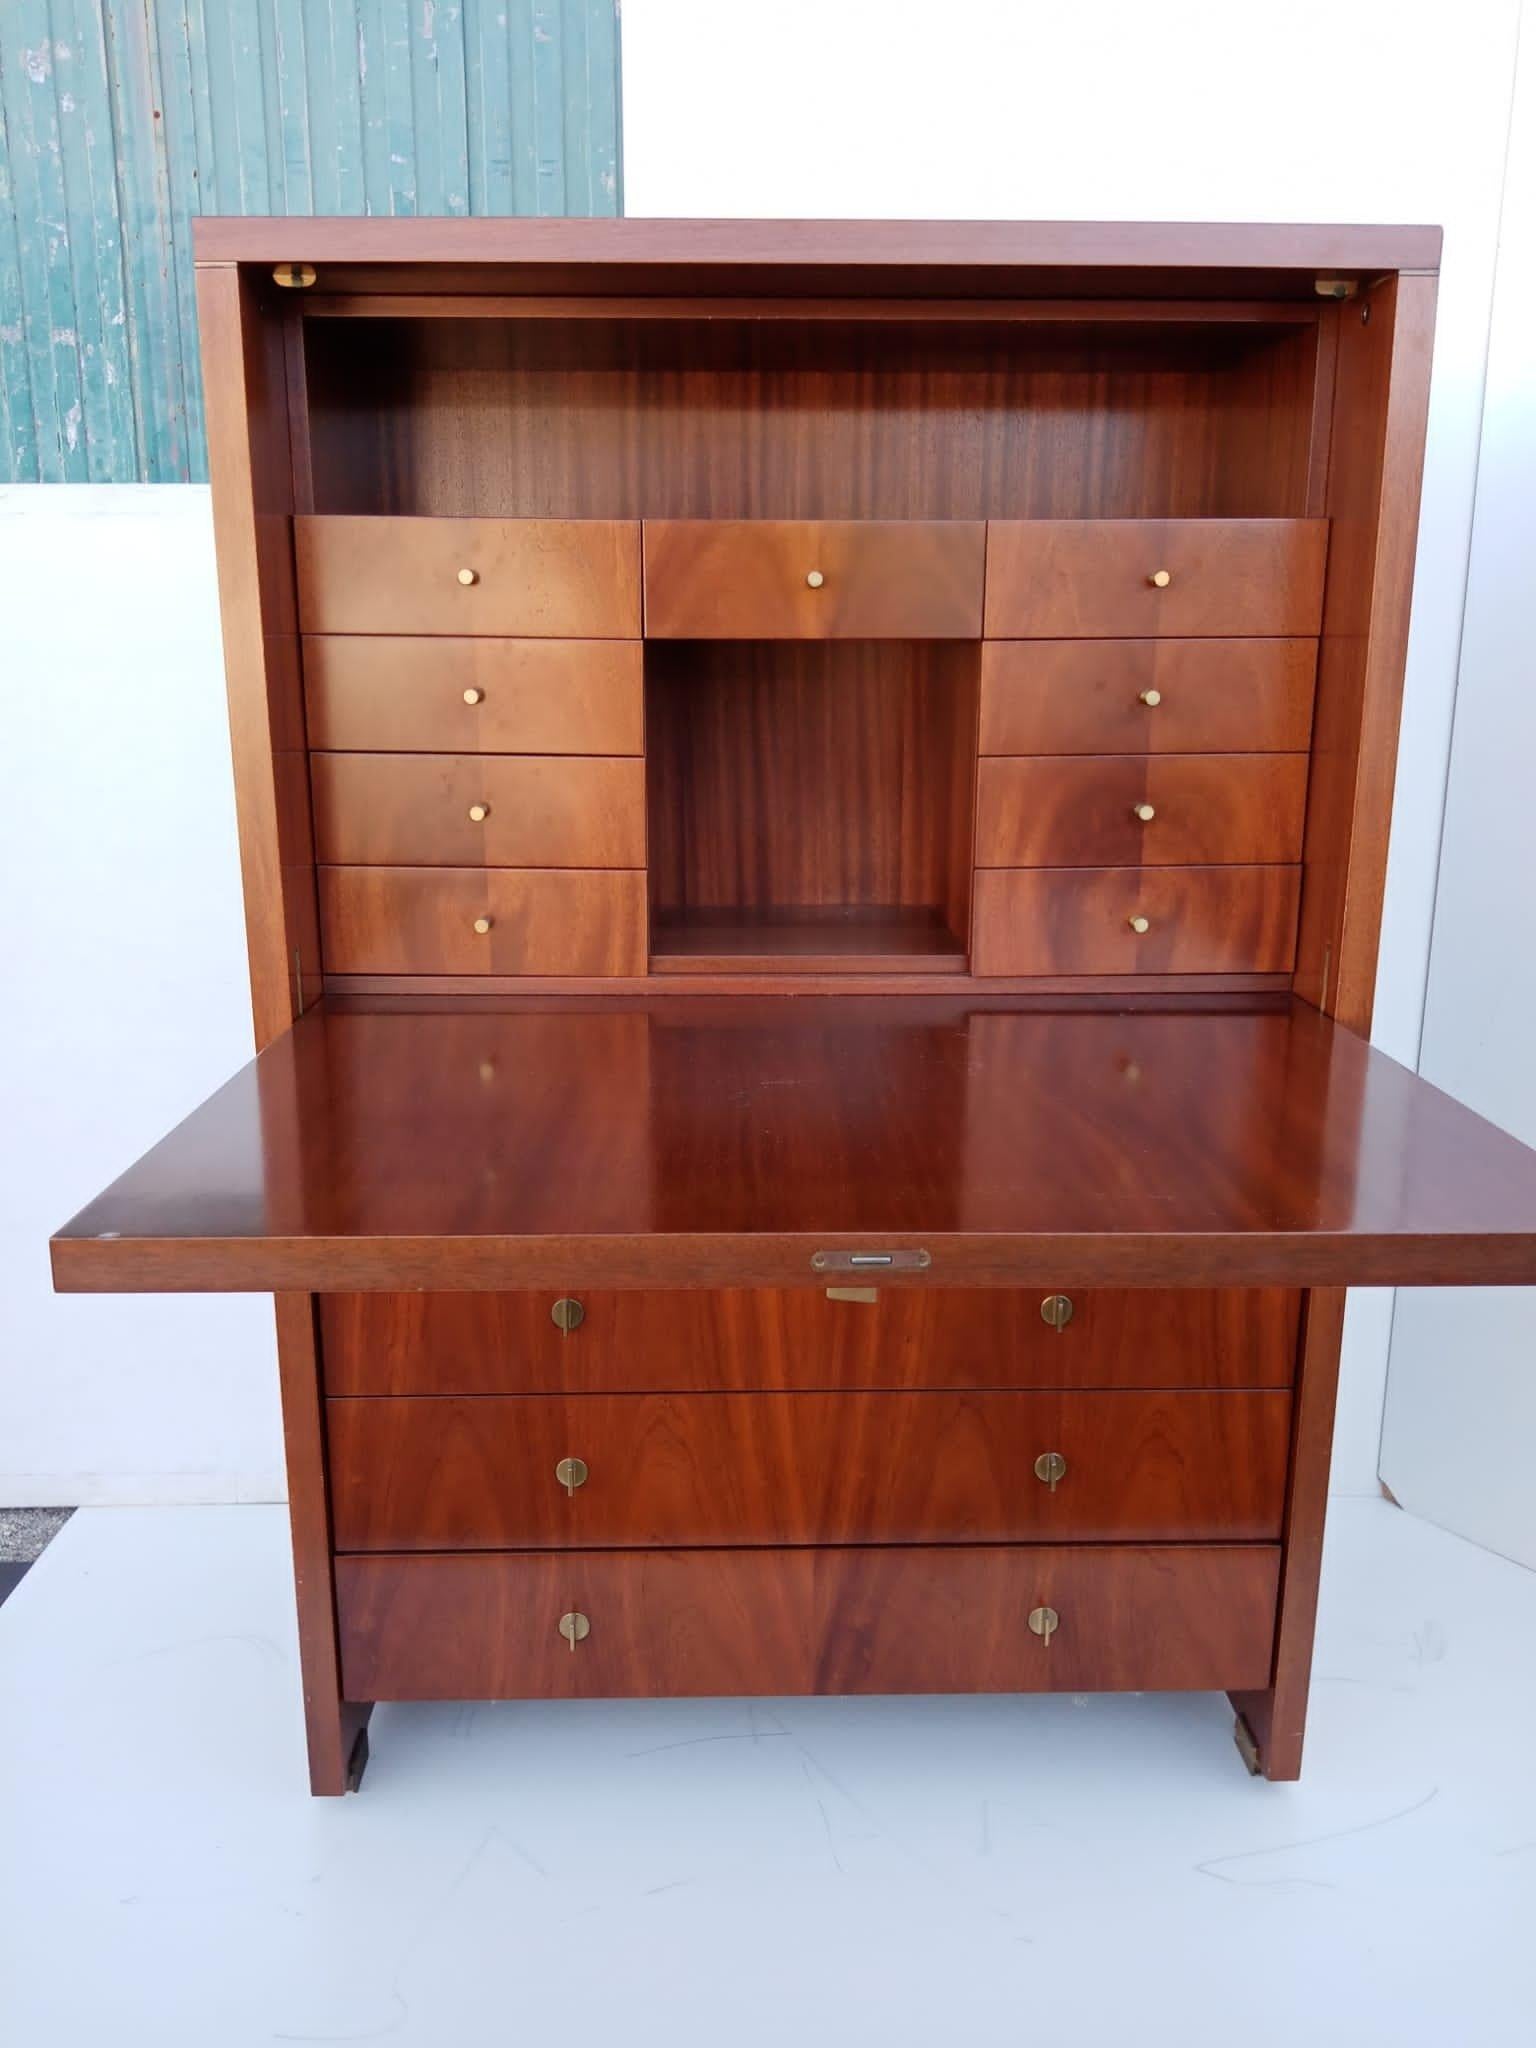 Elegant secretaire designed by French original Pierre Balmain in the 1980s.
The cabinet is easily transformable thanks to the flap door, which opens to provide space for a small desk. It is made of noble wood.
Inside are several drawers and storage